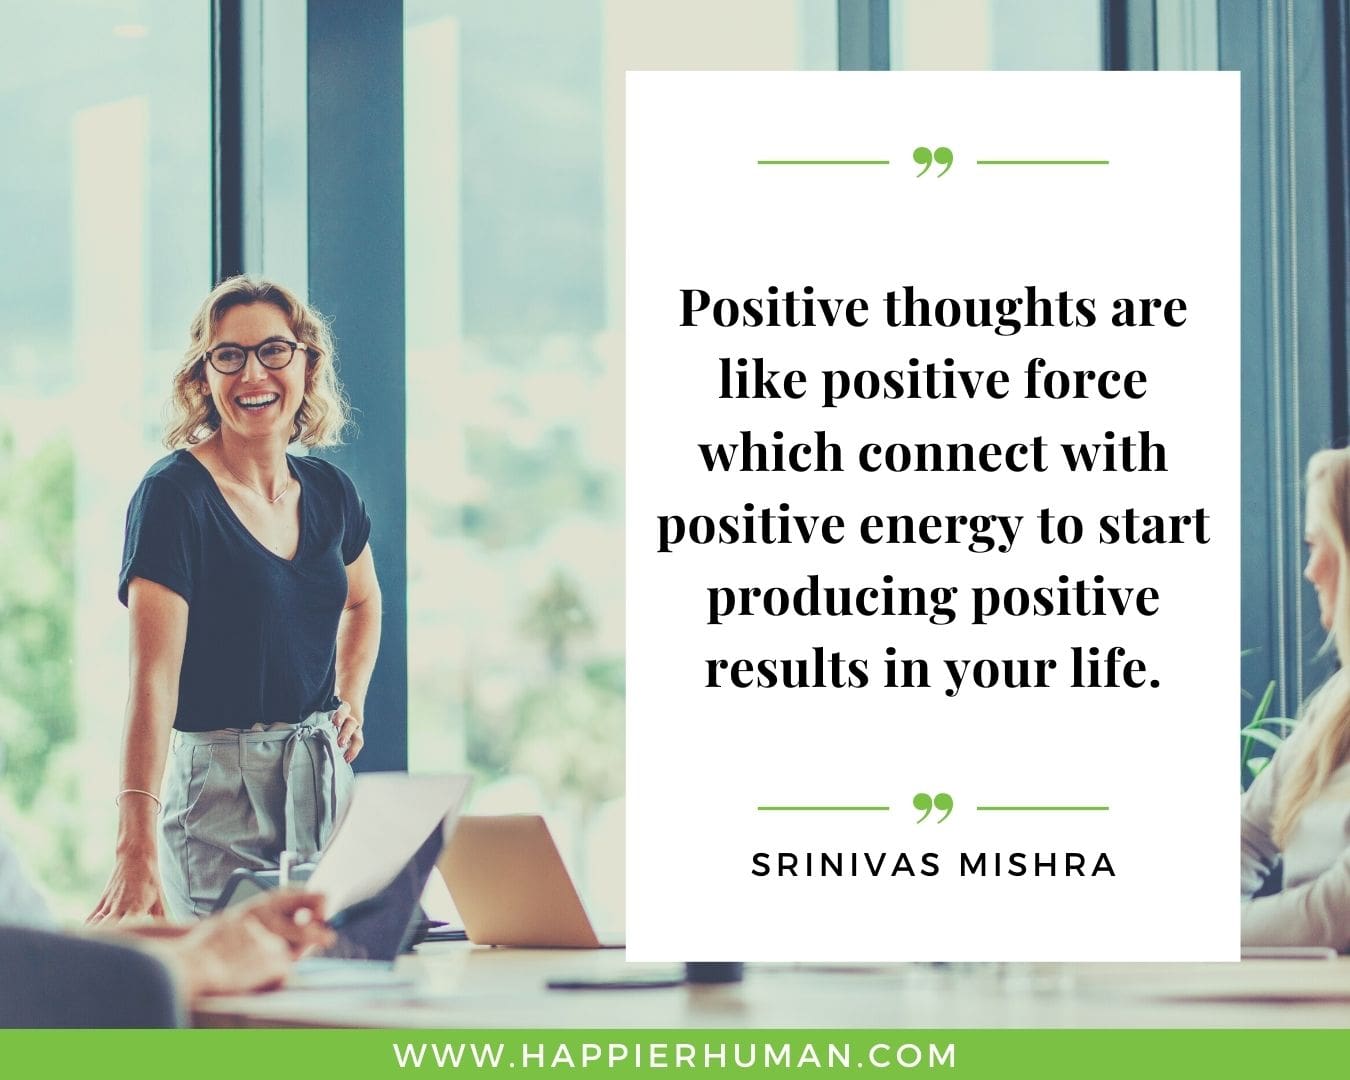 Positive Energy Quotes - “Positive thoughts are like positive force which connect with positive energy to start producing positive results in your life.” - Srinivas Mishra